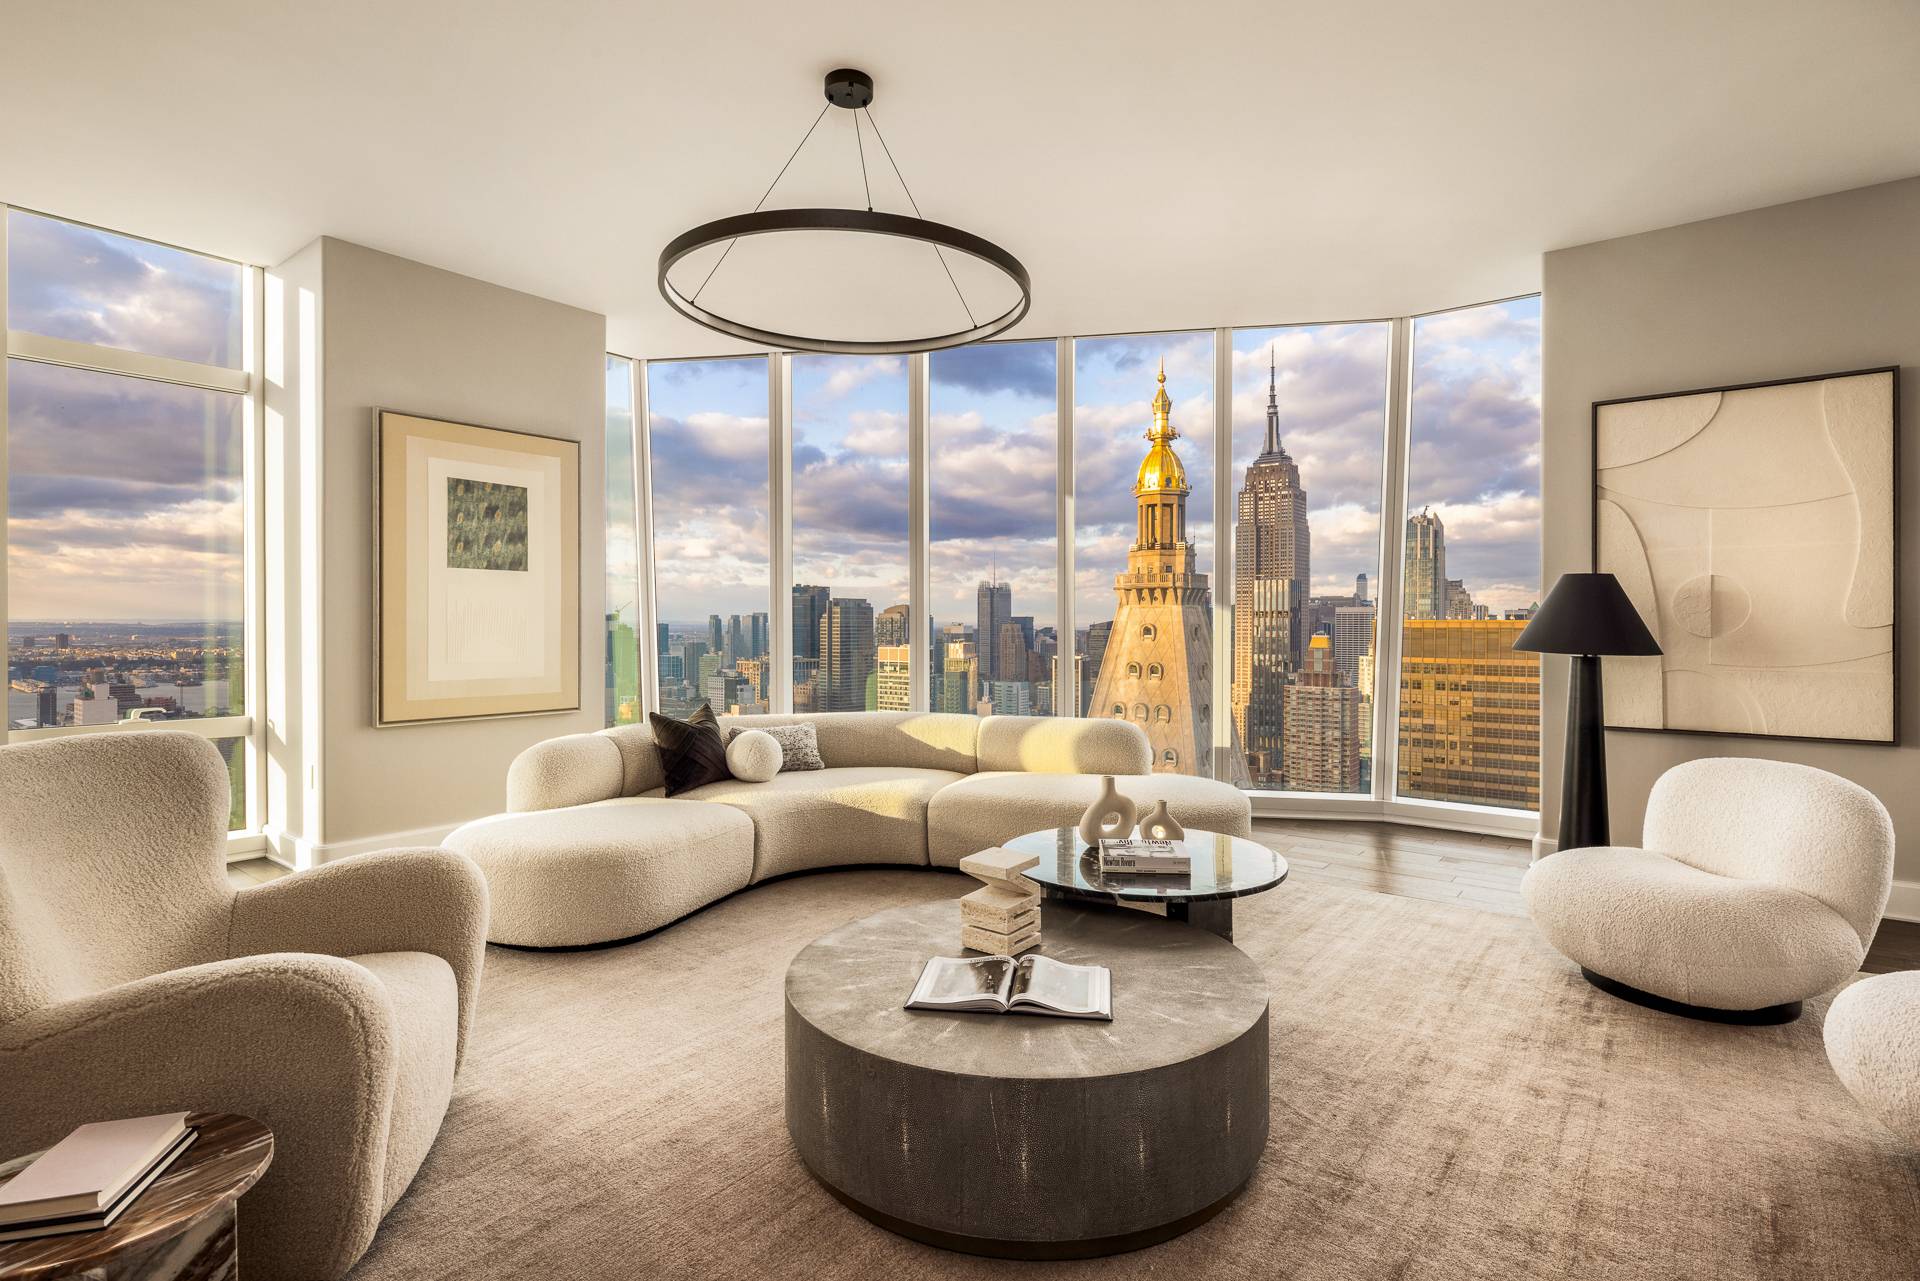 The ultimate 360 degree views in New York City.